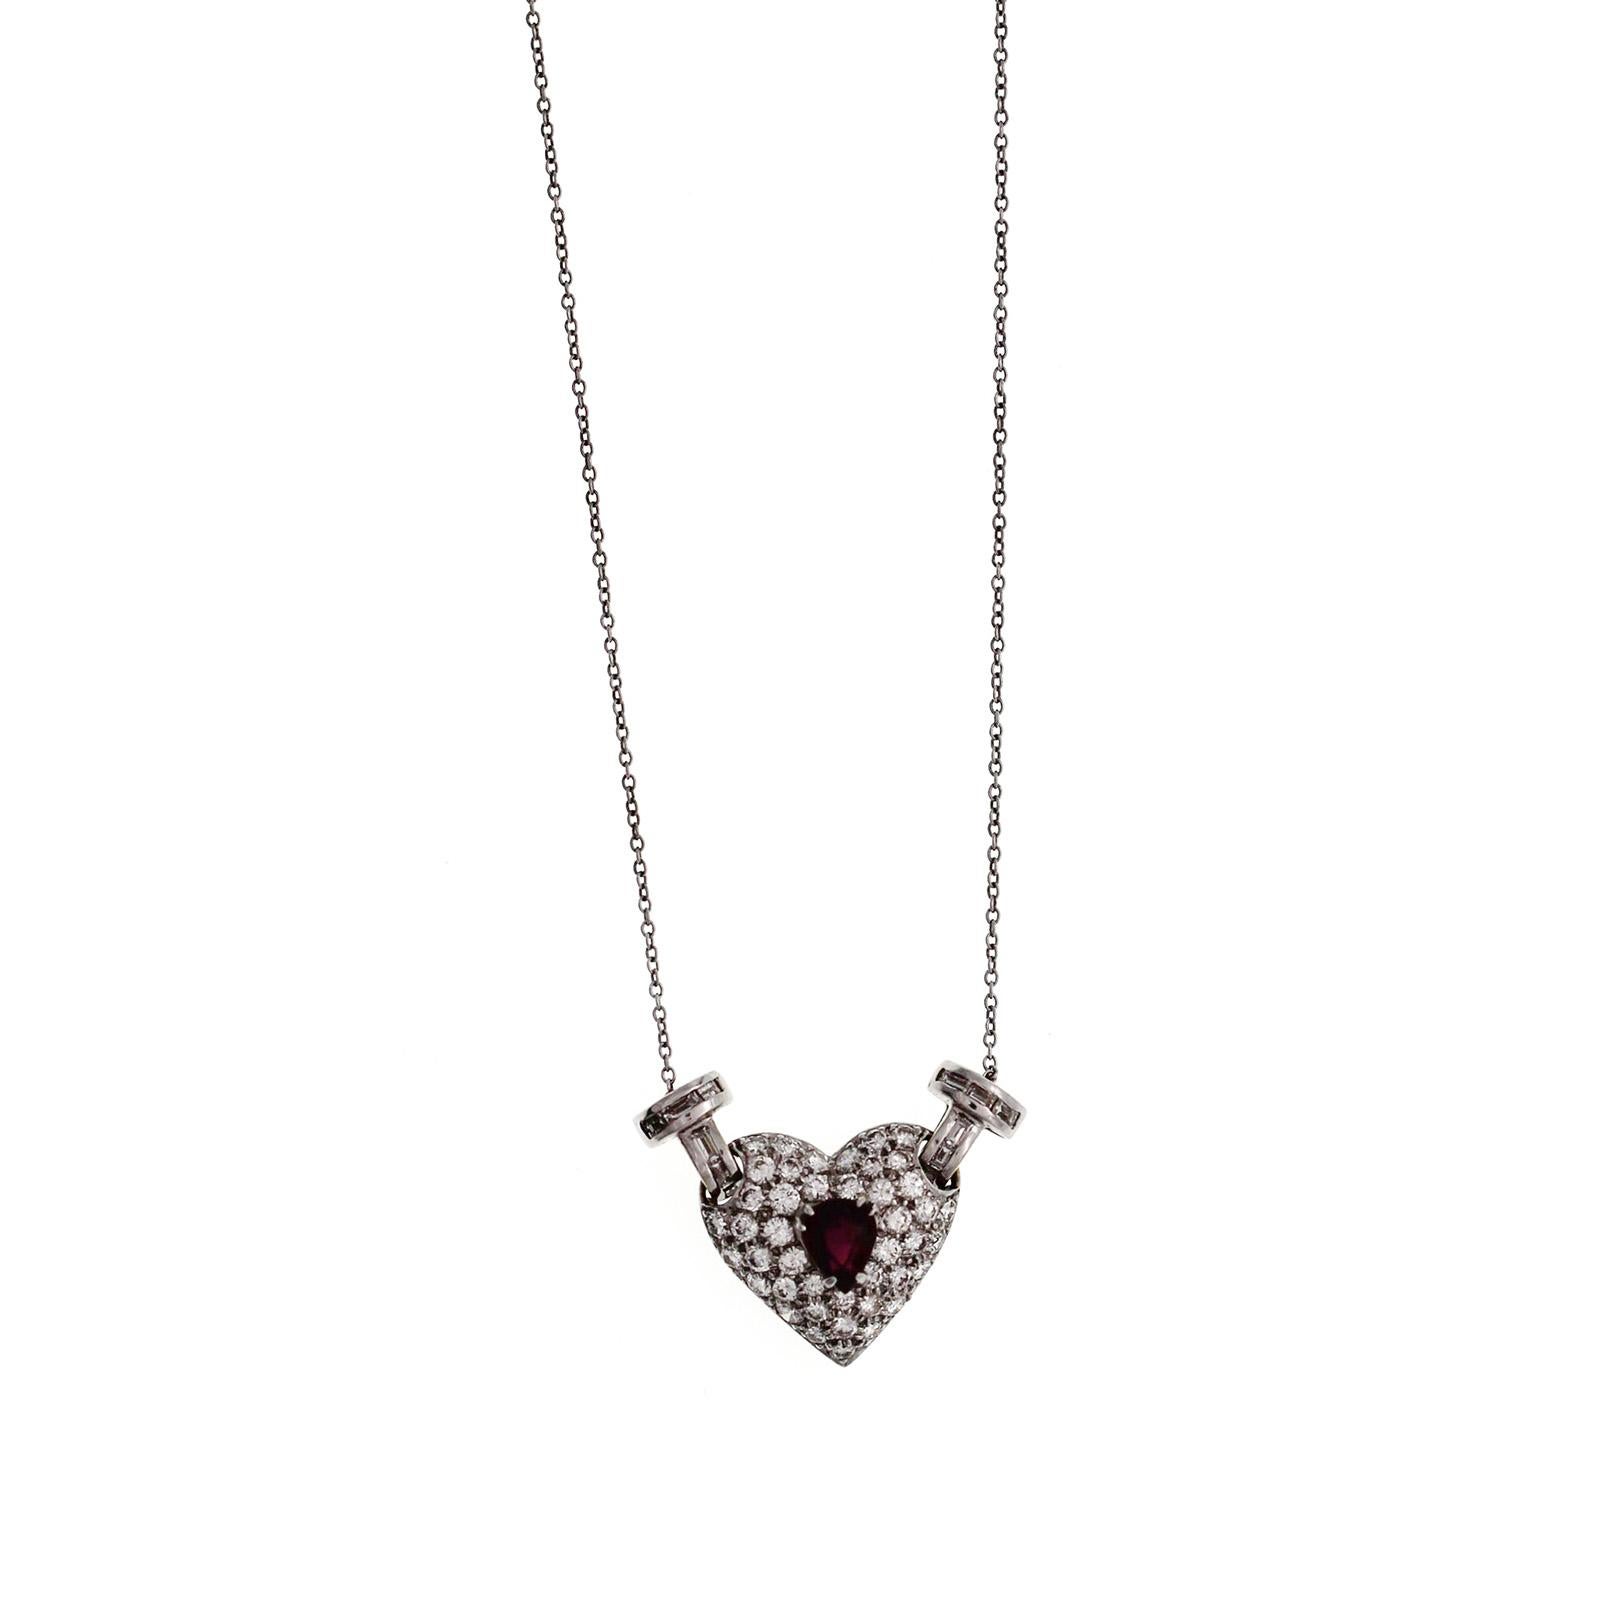 18 Karat White Gold 1.28 Carat Diamonds and 0.50 Carat Ruby Heart Necklace For Sale 1